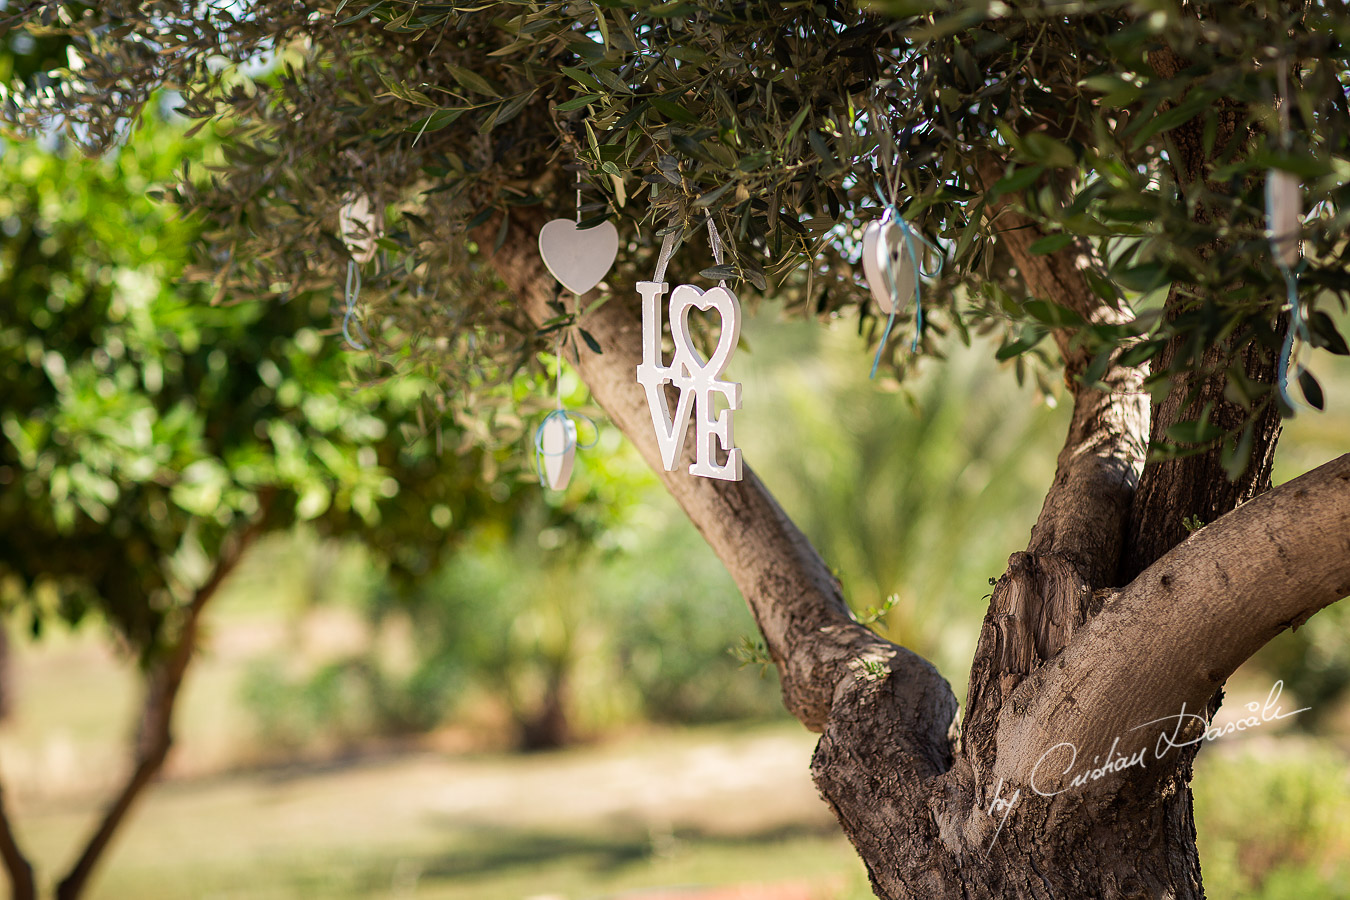 Beautiful wedding decorations captured at a wedding at Minthis Hills in Cyprus, by Cristian Dascalu.